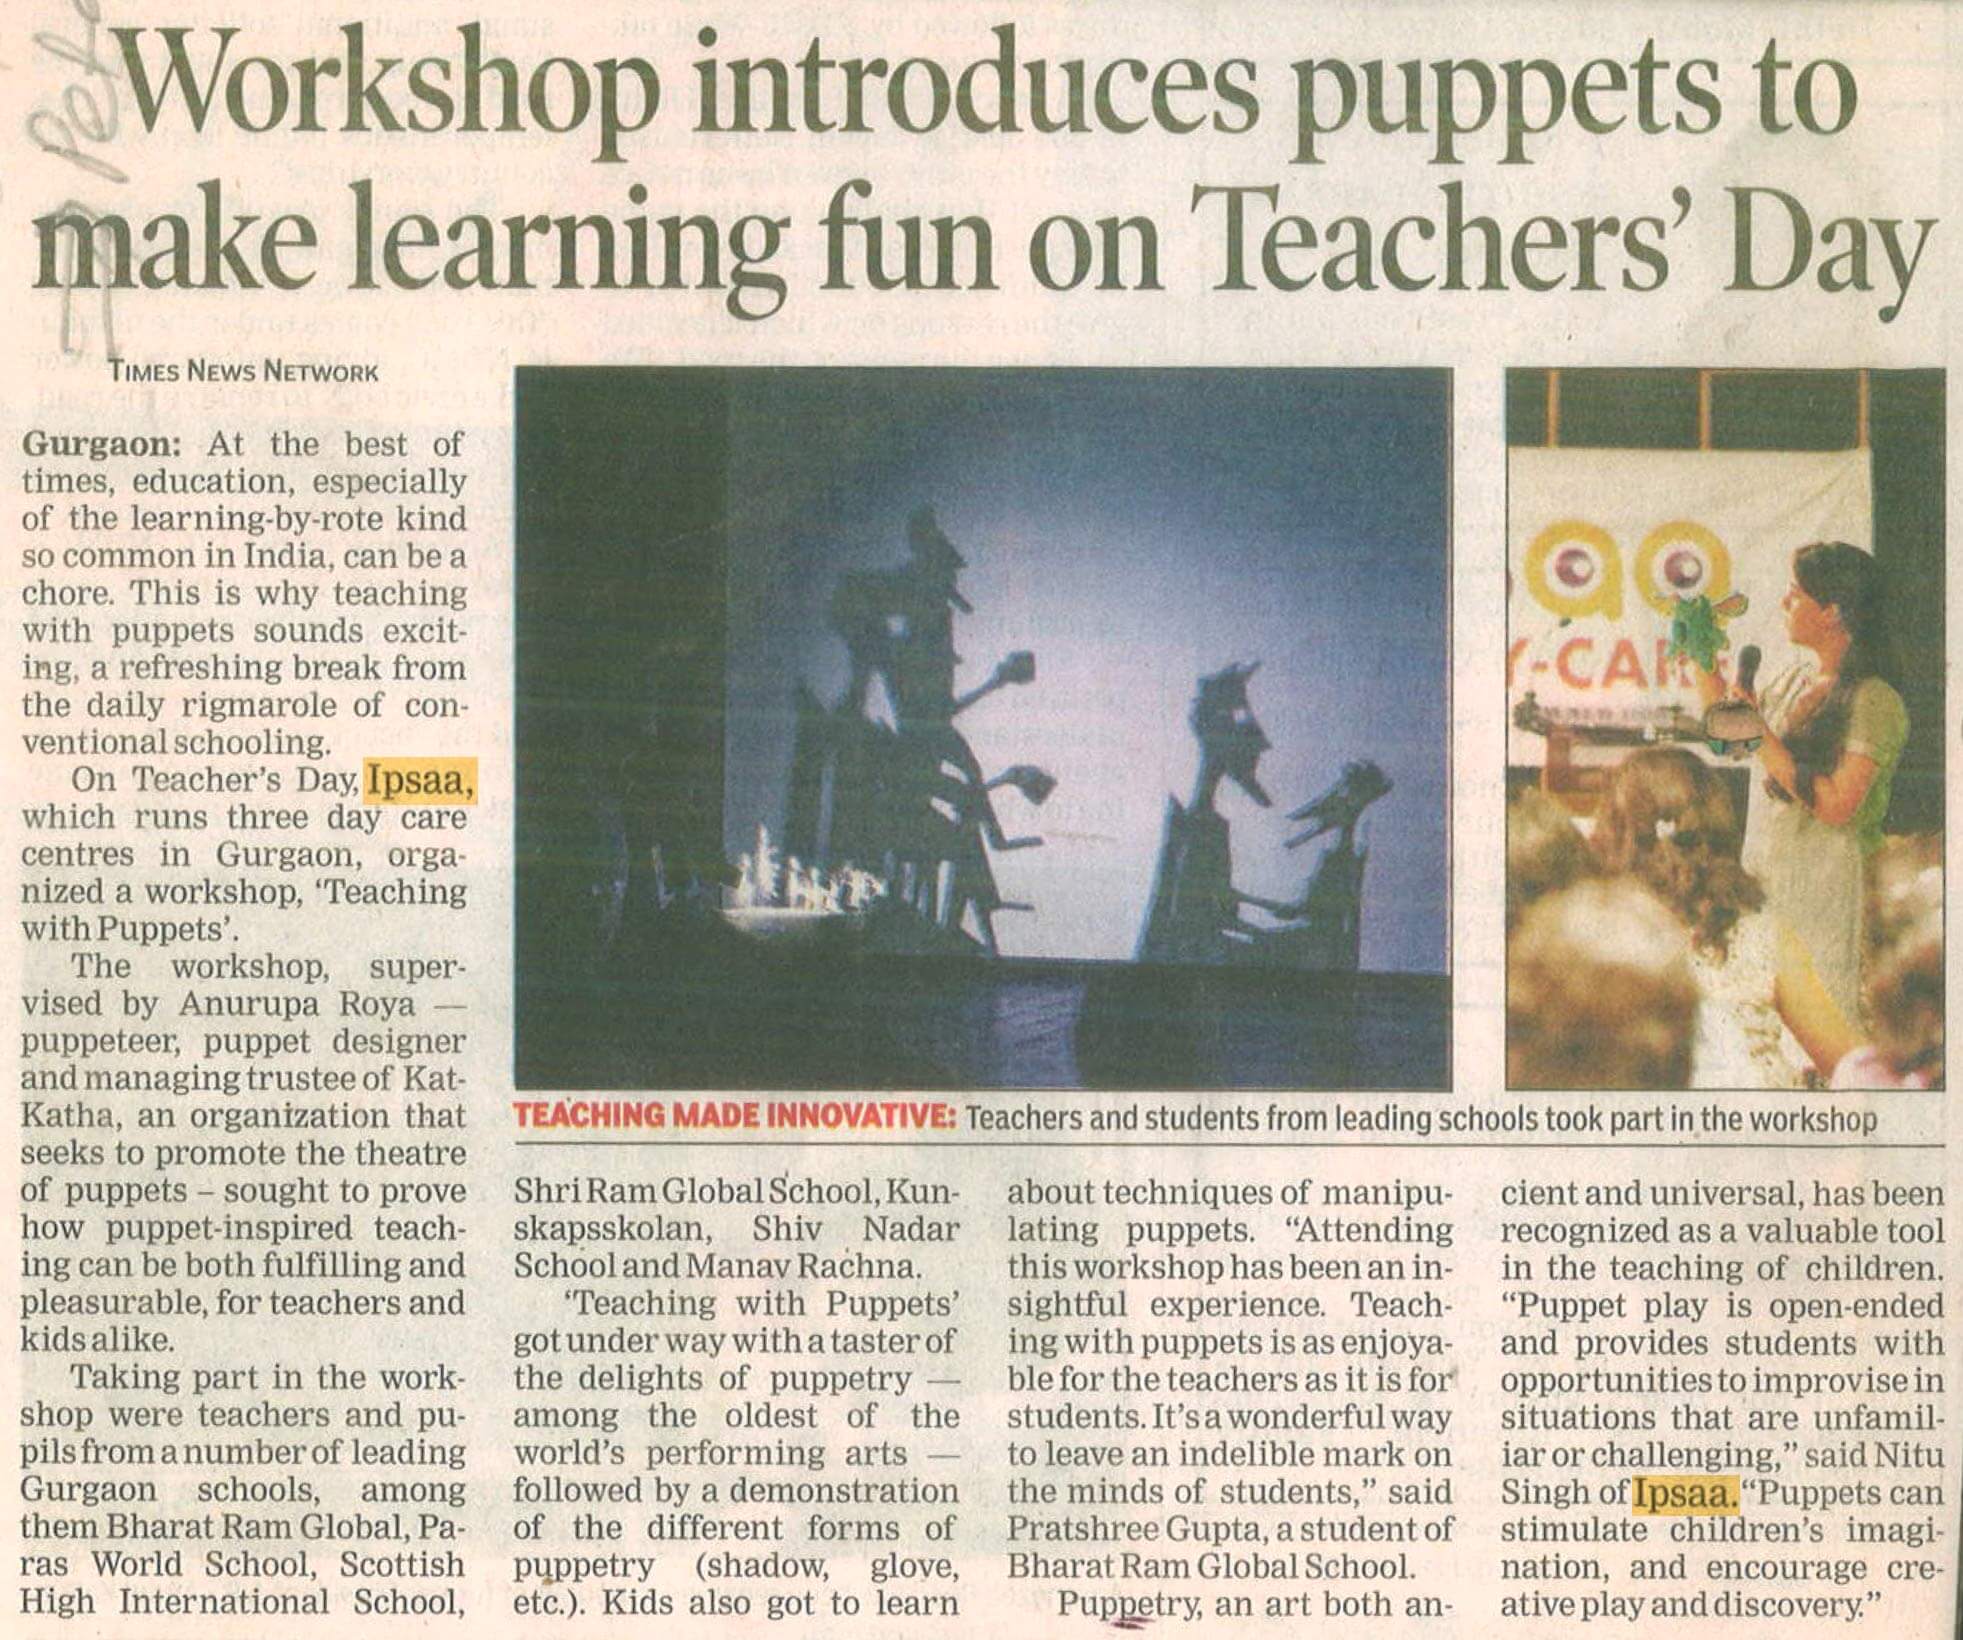 Workshop introduces puppets to make learning fun on Teachers’ Day